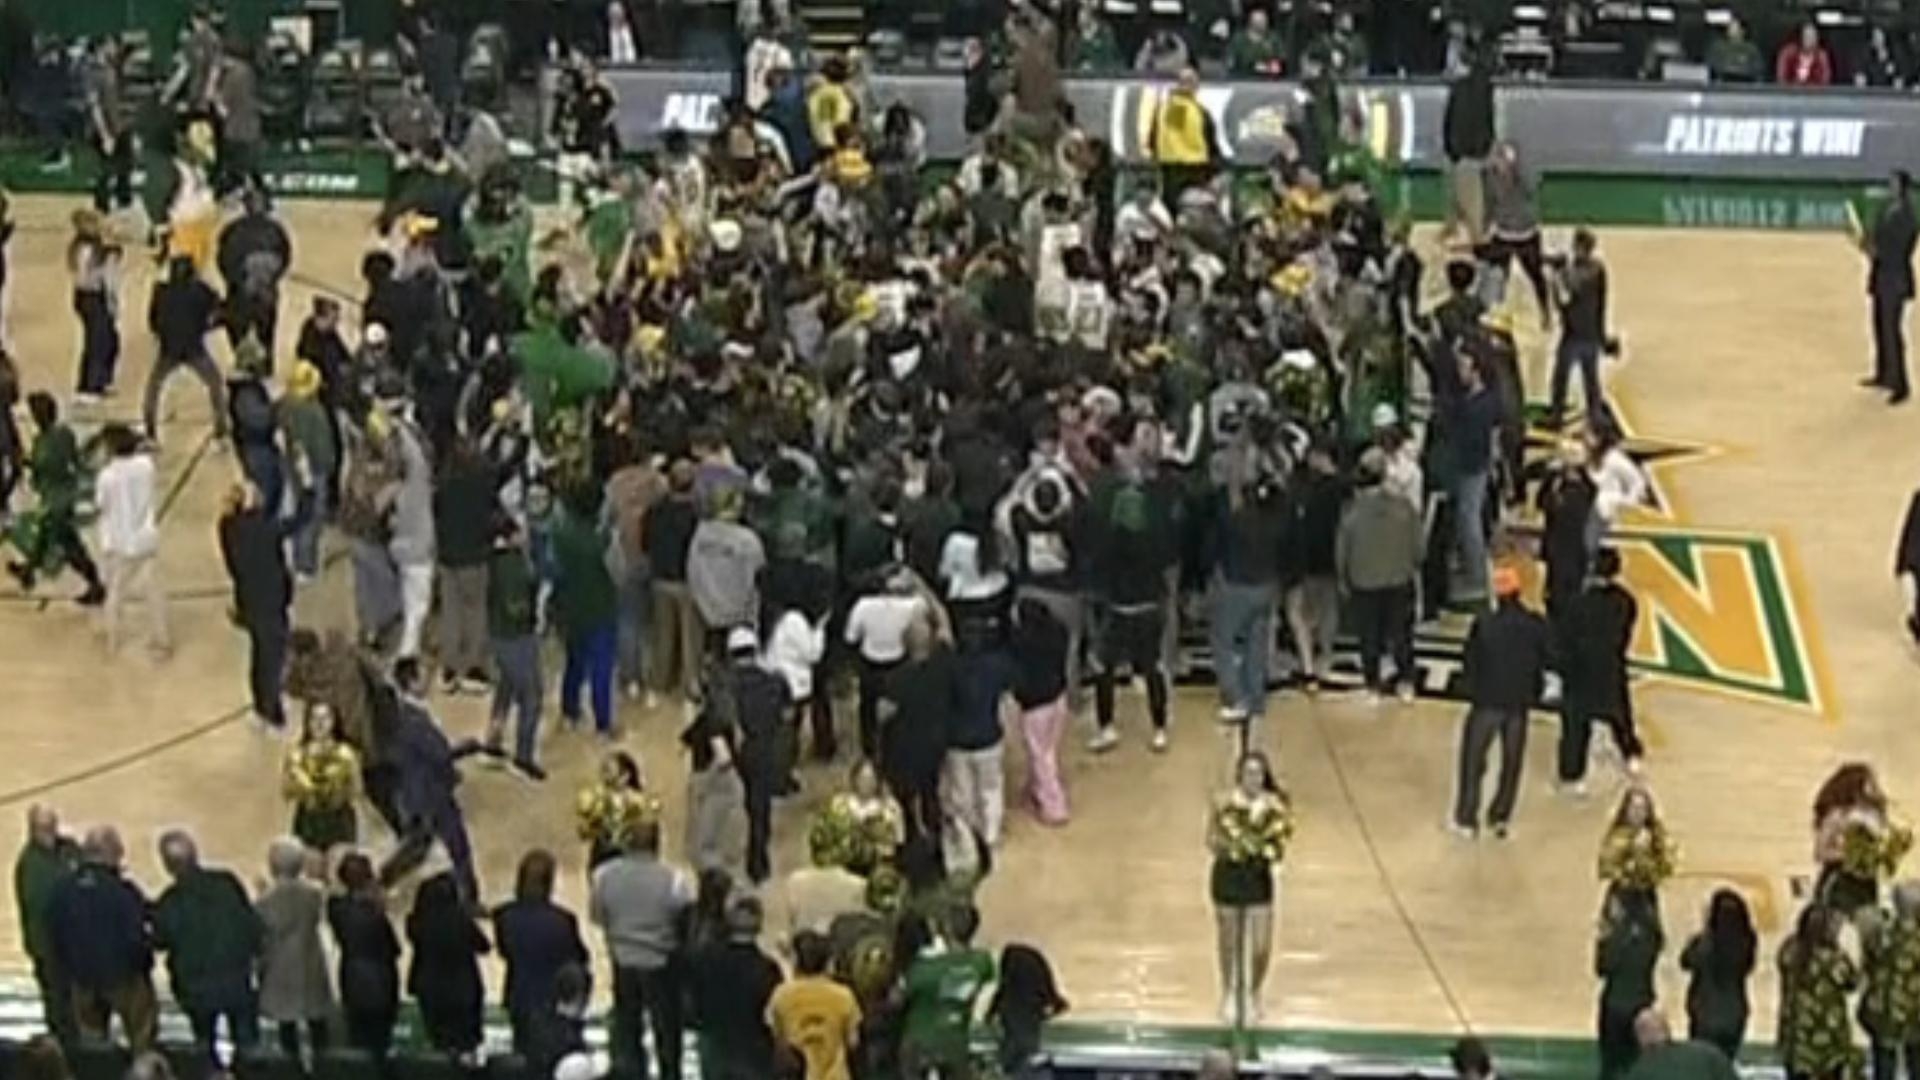 George Mason fans rush the court after upset over No. 16 Dayton